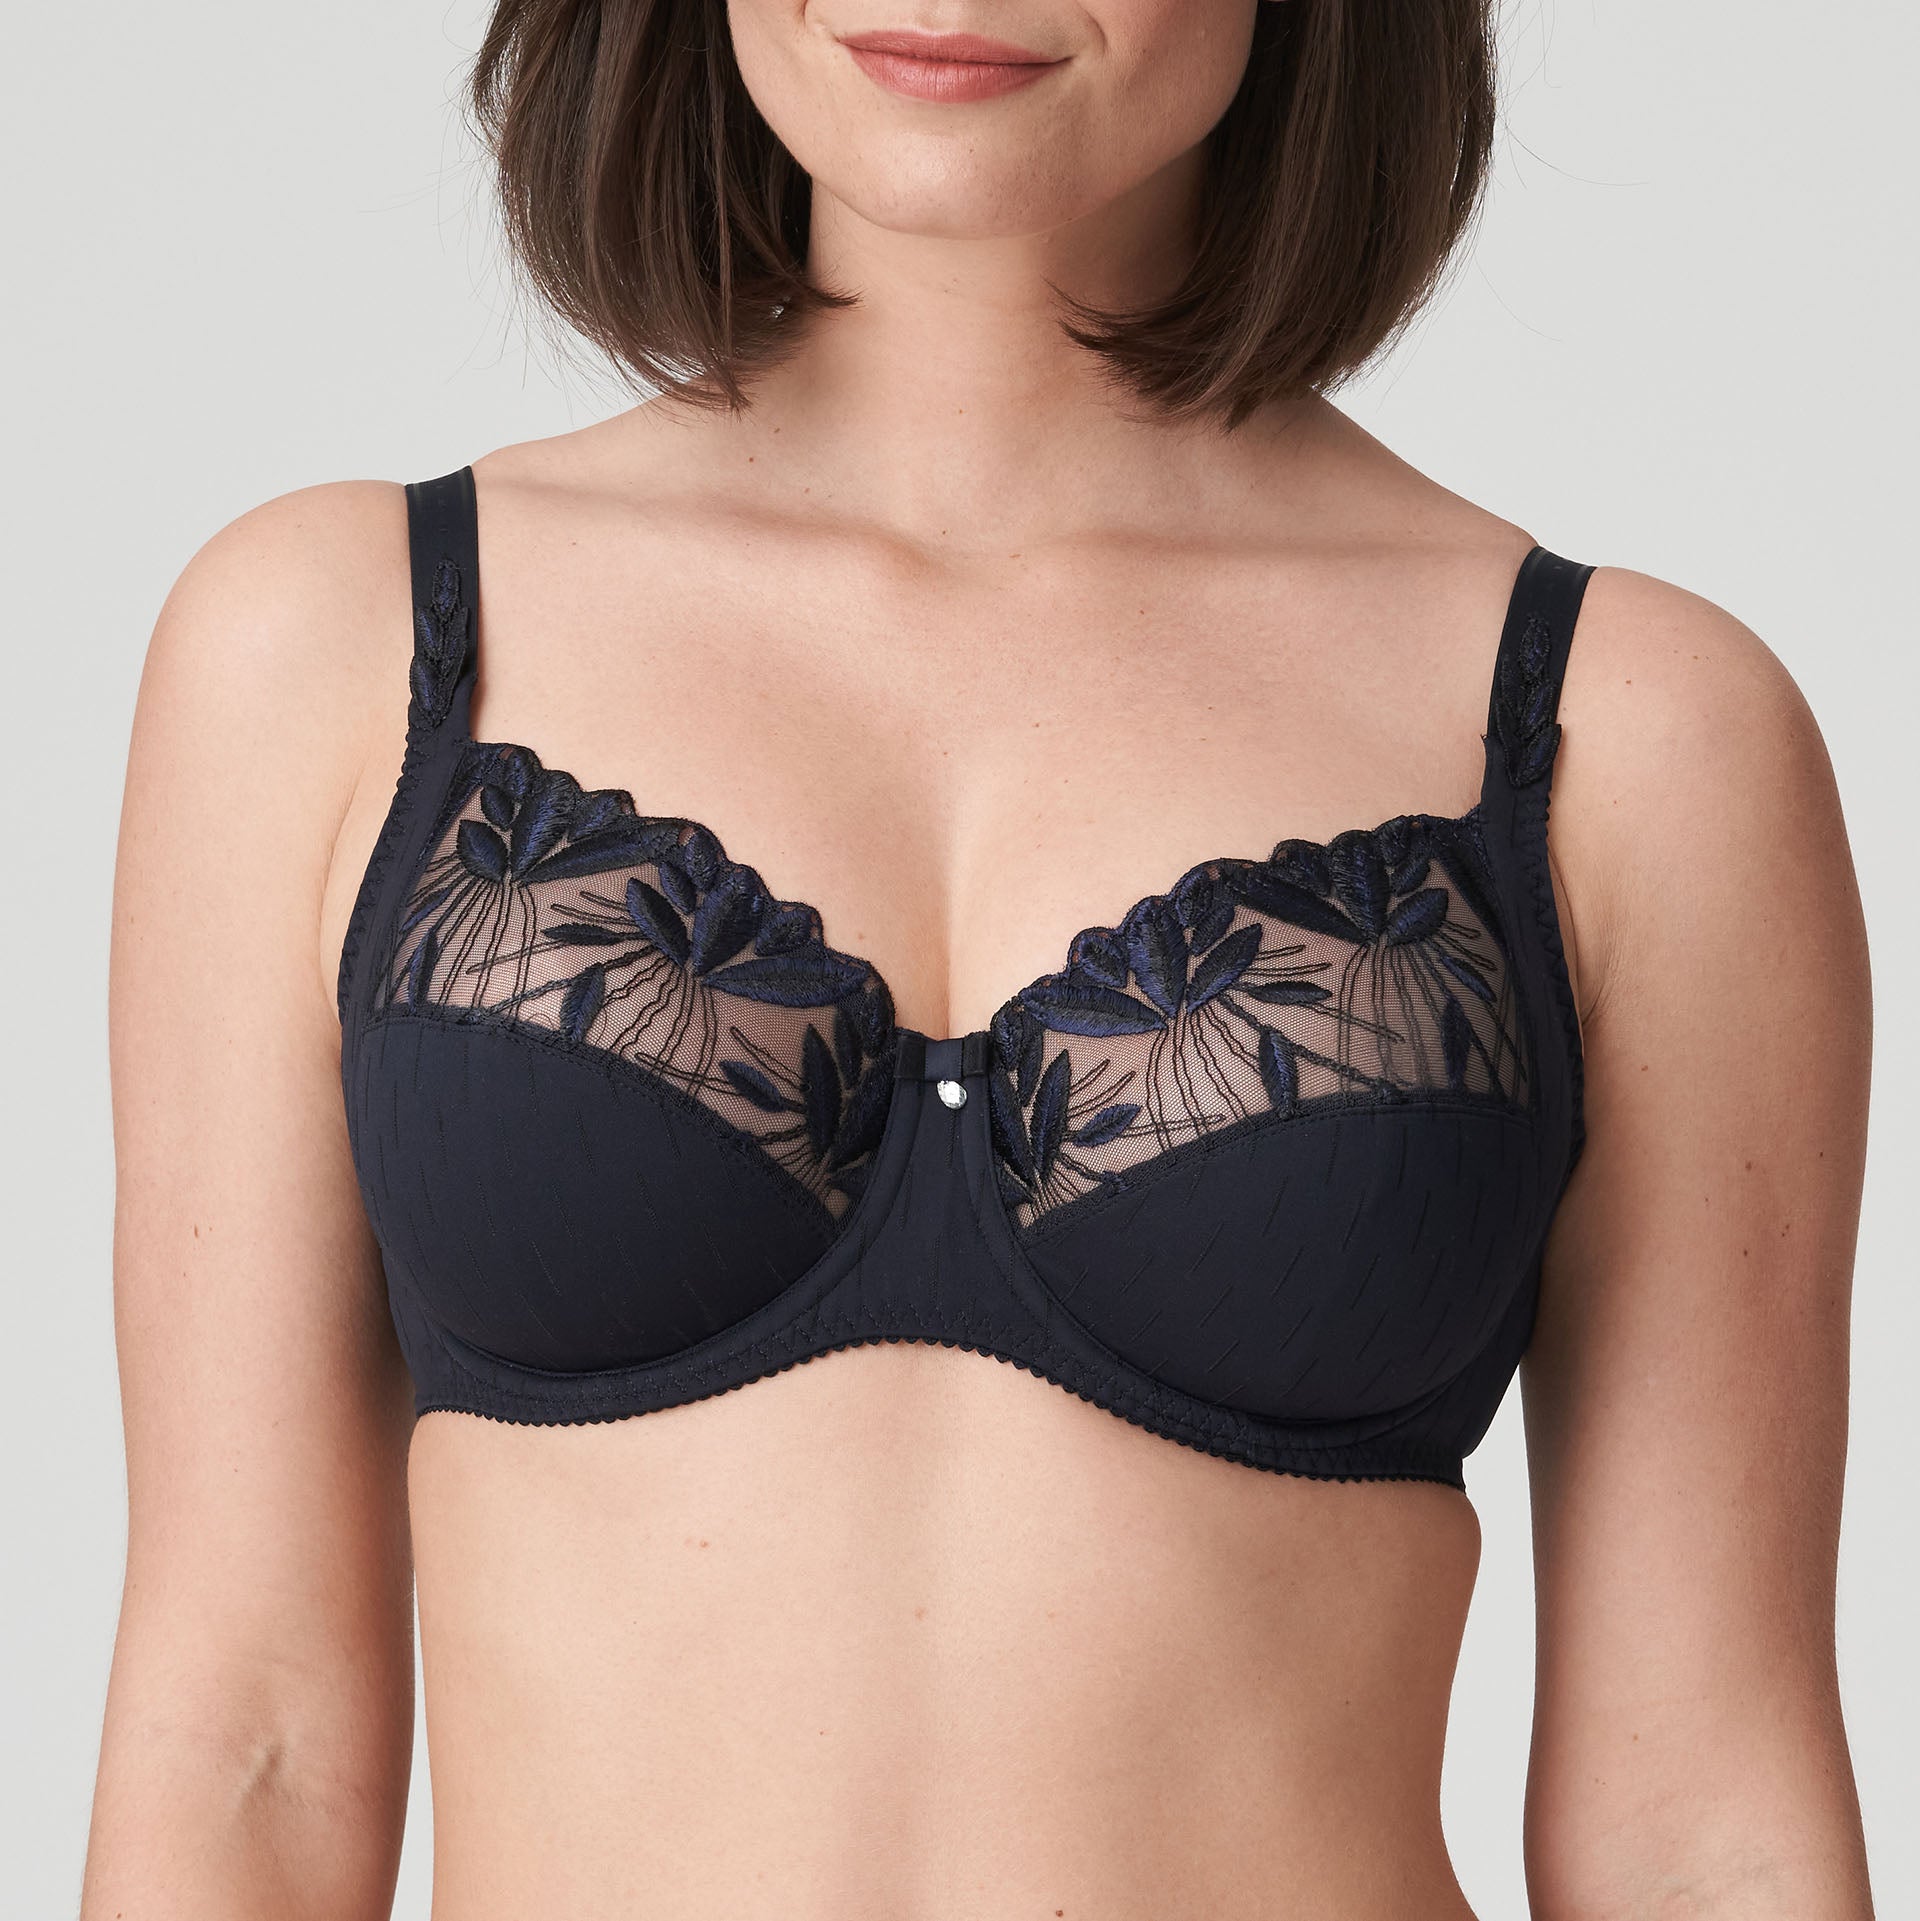 Prima Donna Deauville Full Cup Body - Belle Lingerie